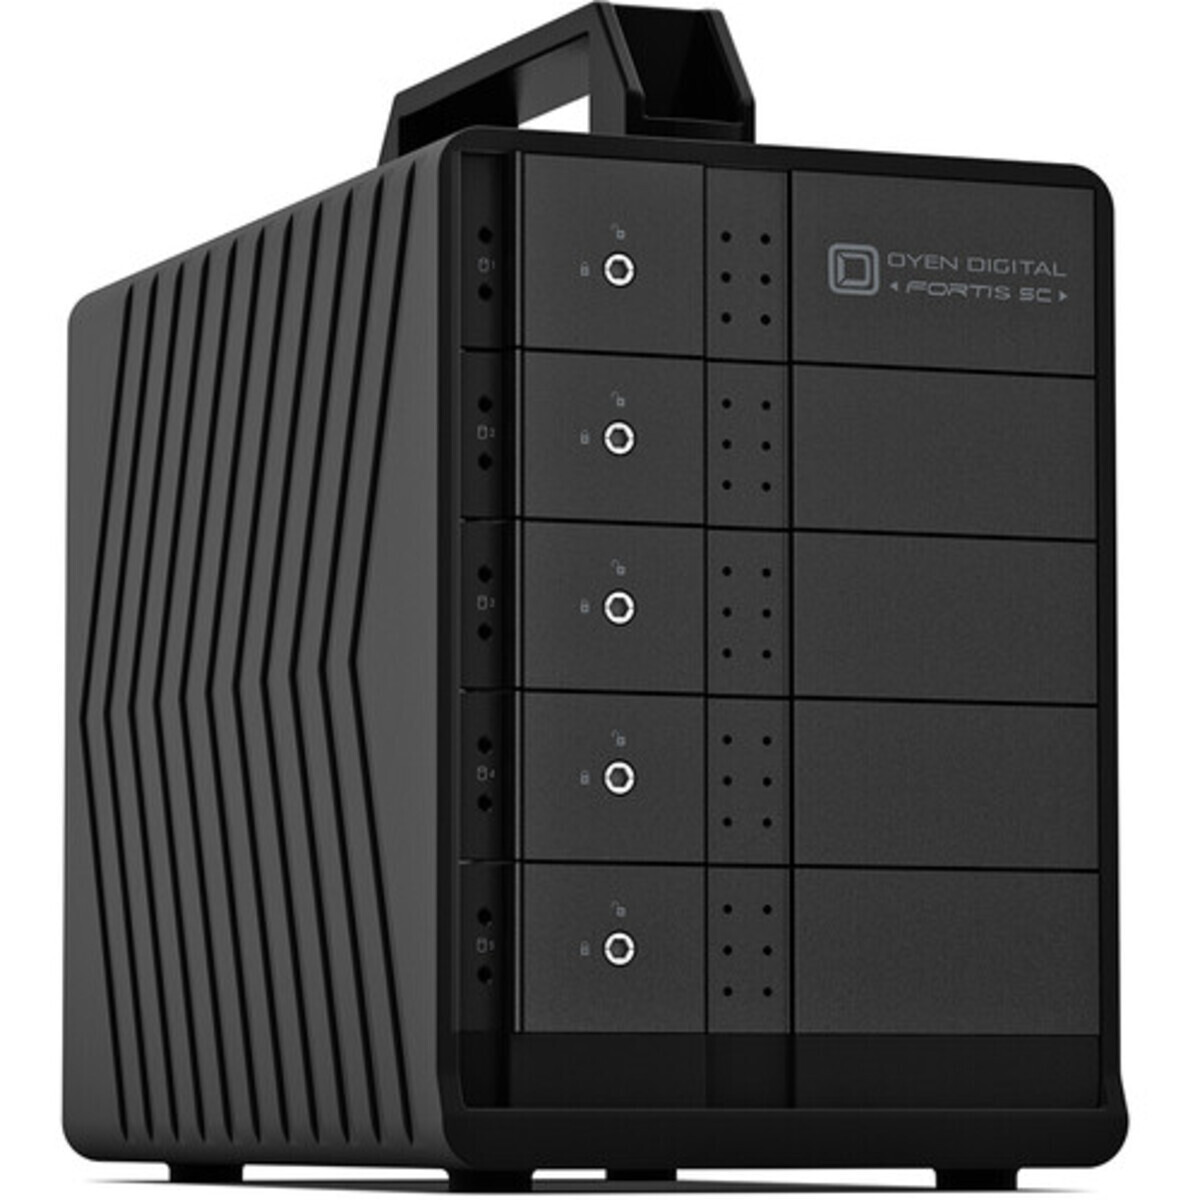 OYEN Fortis 5C 20tb 5-Bay Desktop Multimedia / Power User / Business DAS - Direct Attached Storage Device 5x4tb Seagate BarraCuda ST4000DM004 3.5 7200rpm SATA 6Gb/s HDD CONSUMER Class Drives Installed - Burn-In Tested Fortis 5C